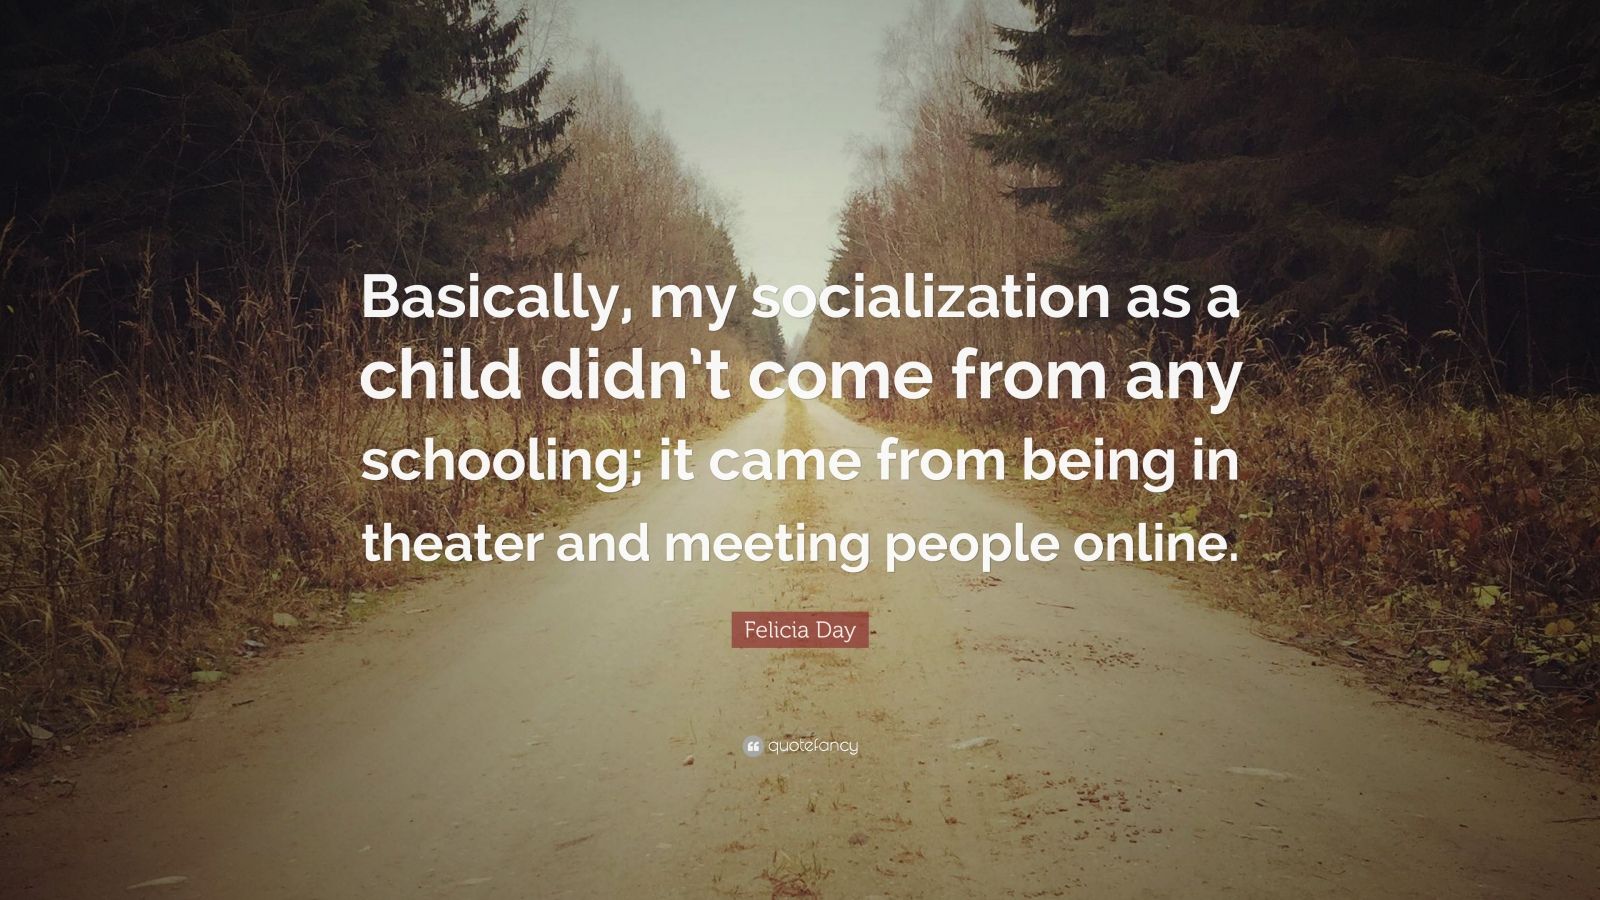 Felicia Day Quote: “Basically, my socialization as a child didn’t come ...